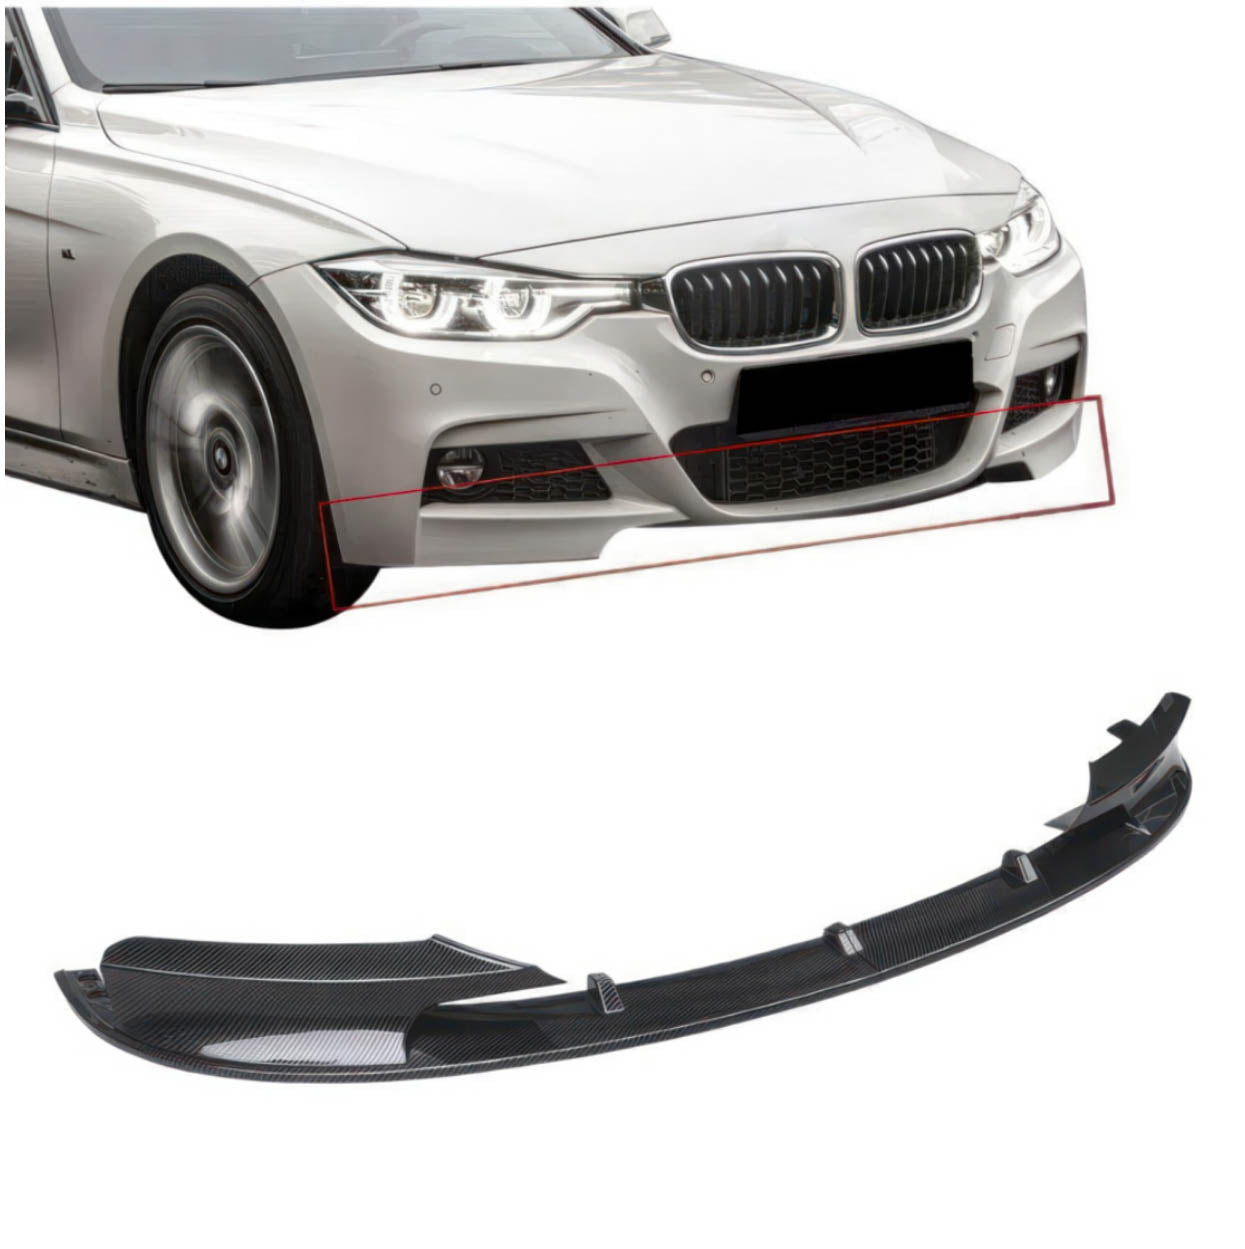 Front Lip M Bumper for BMW 3 Series Sport 2011-2015 F30 and 2015-2018 F30 fl